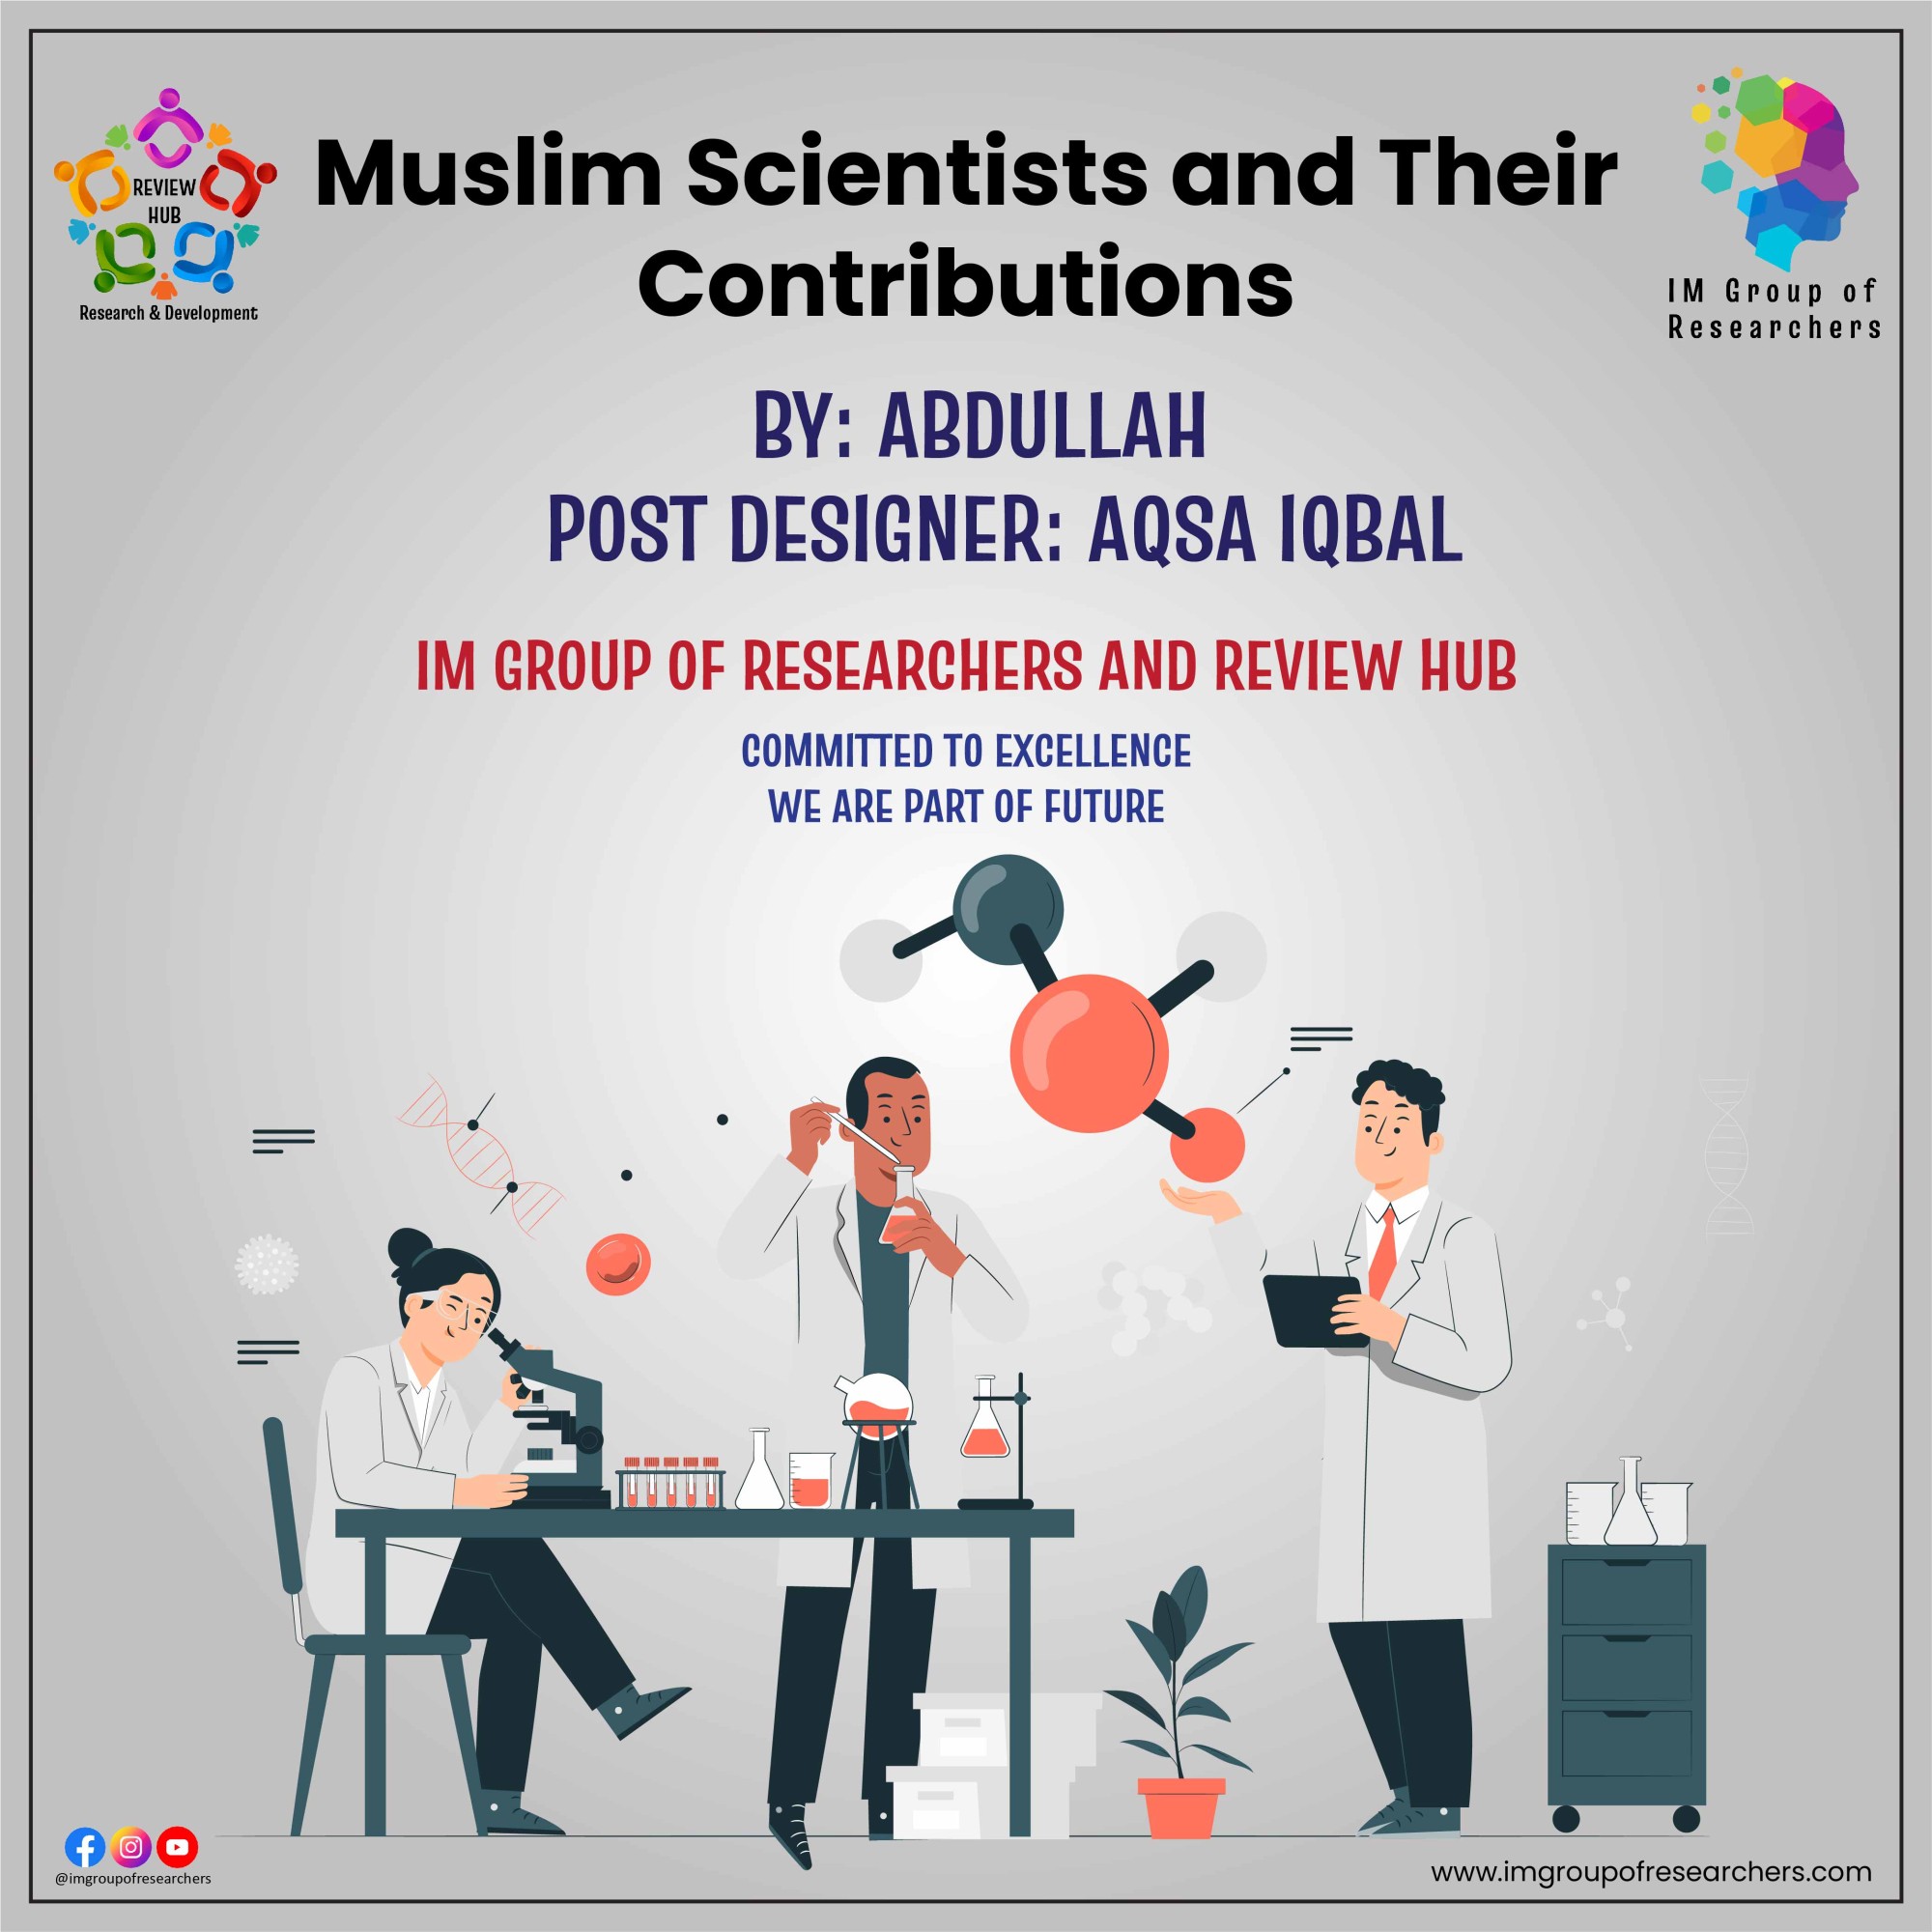 Muslim Scientists and Their Contributions